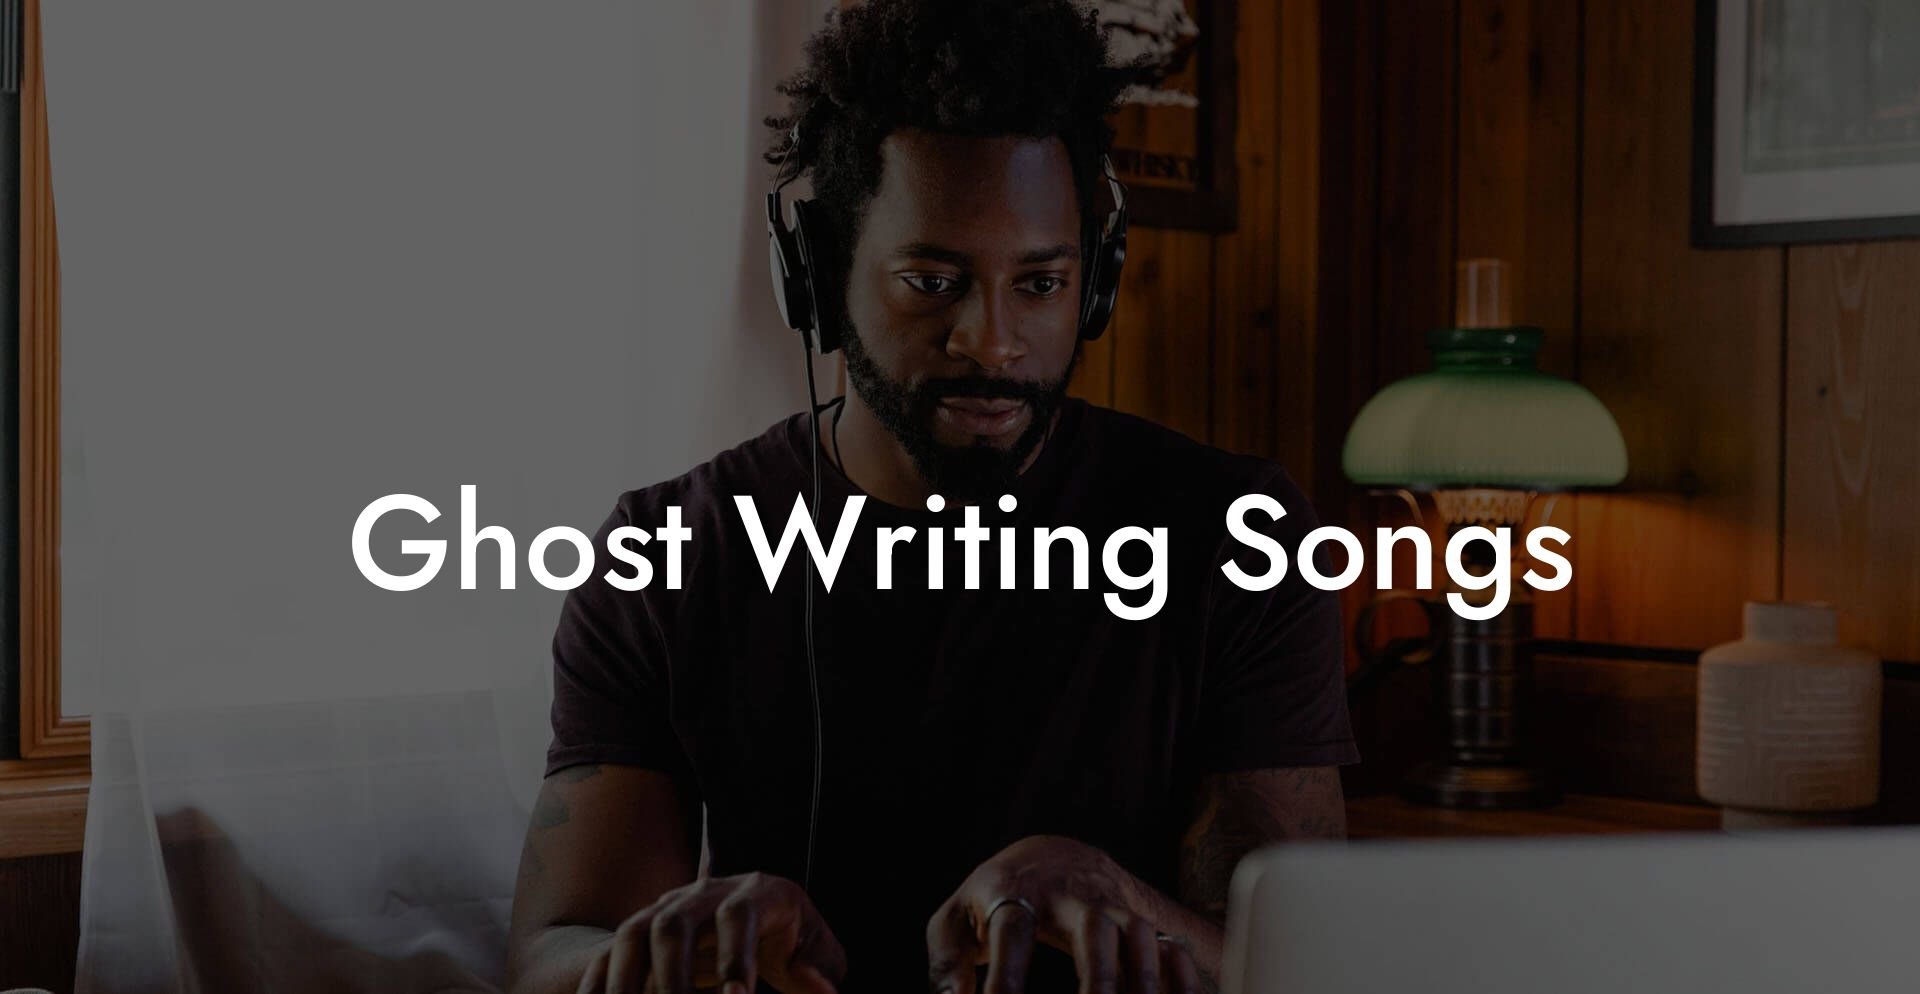 ghost writing songs lyric assistant